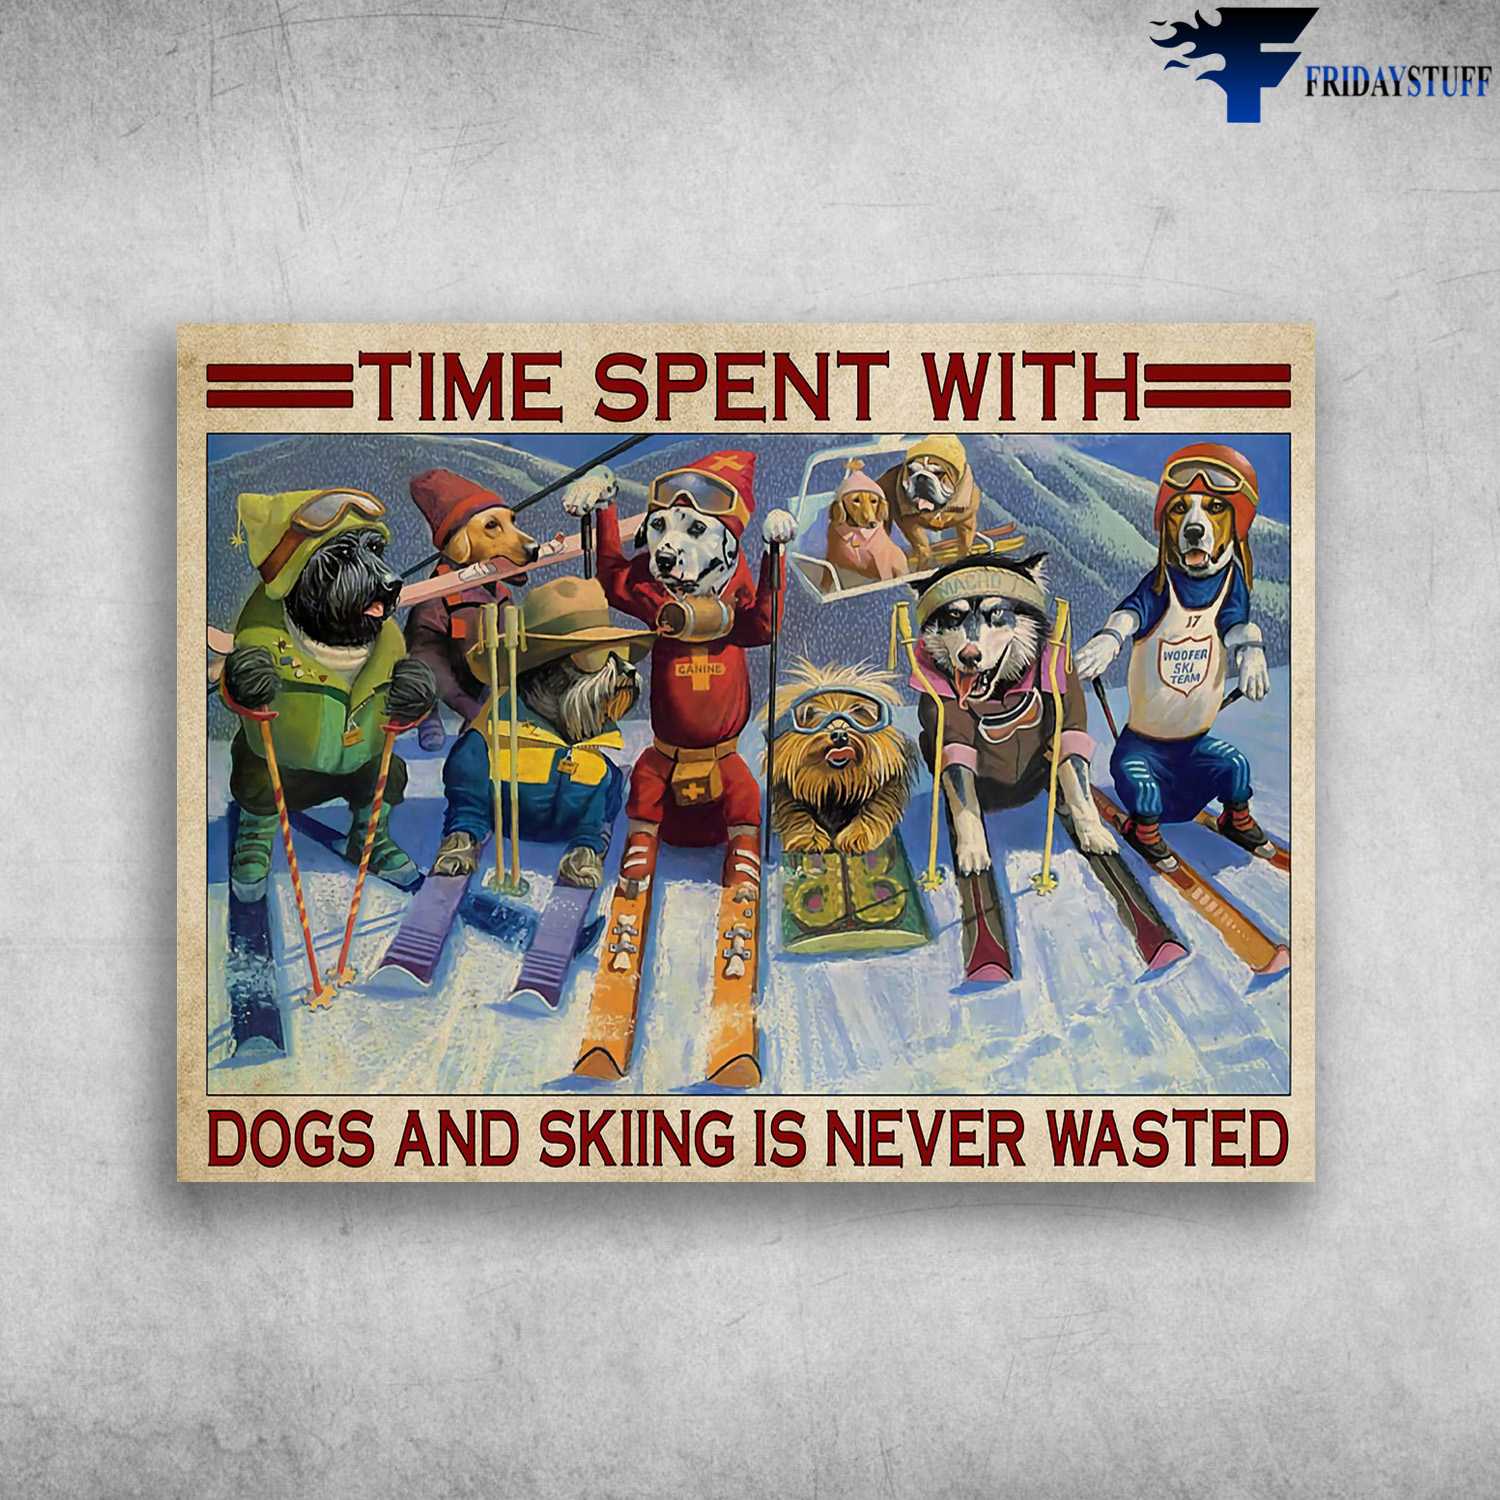 Dog Lover, Skiing Dog, Skiing Poster, Time Spent With, Dogs And Skiing, Is Never Wasted